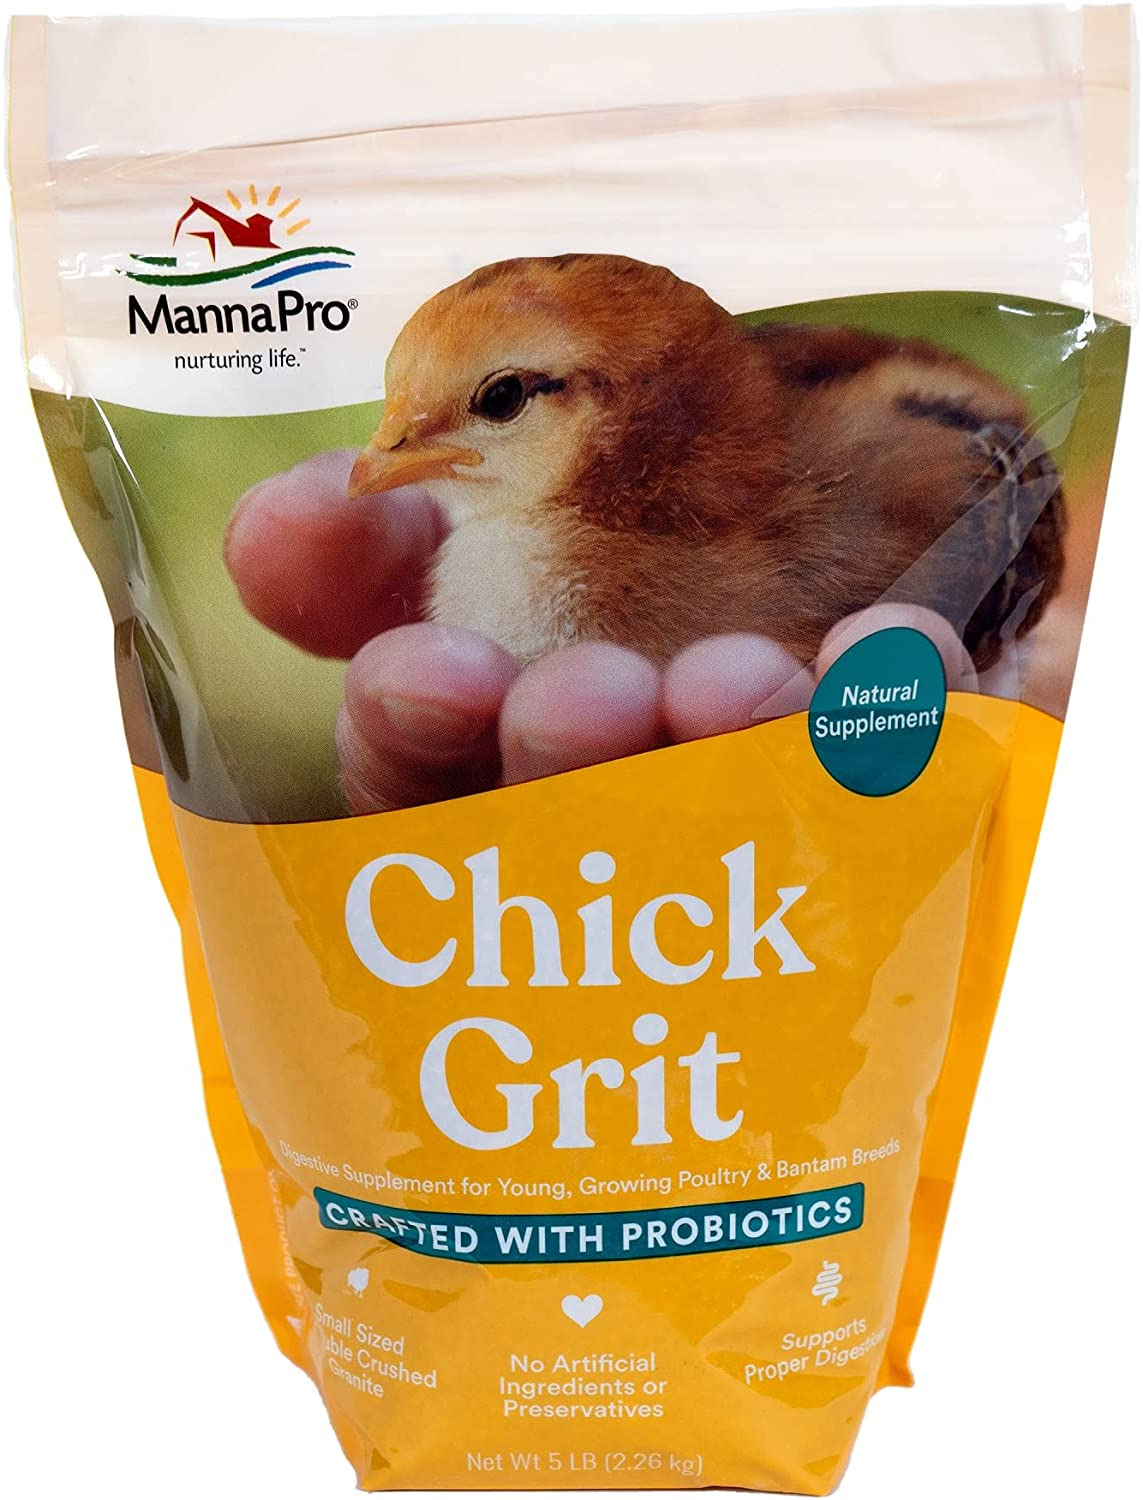 Chick Grit Digestive Supplement for Young Growing Poultry & Bantam Breeds - No A